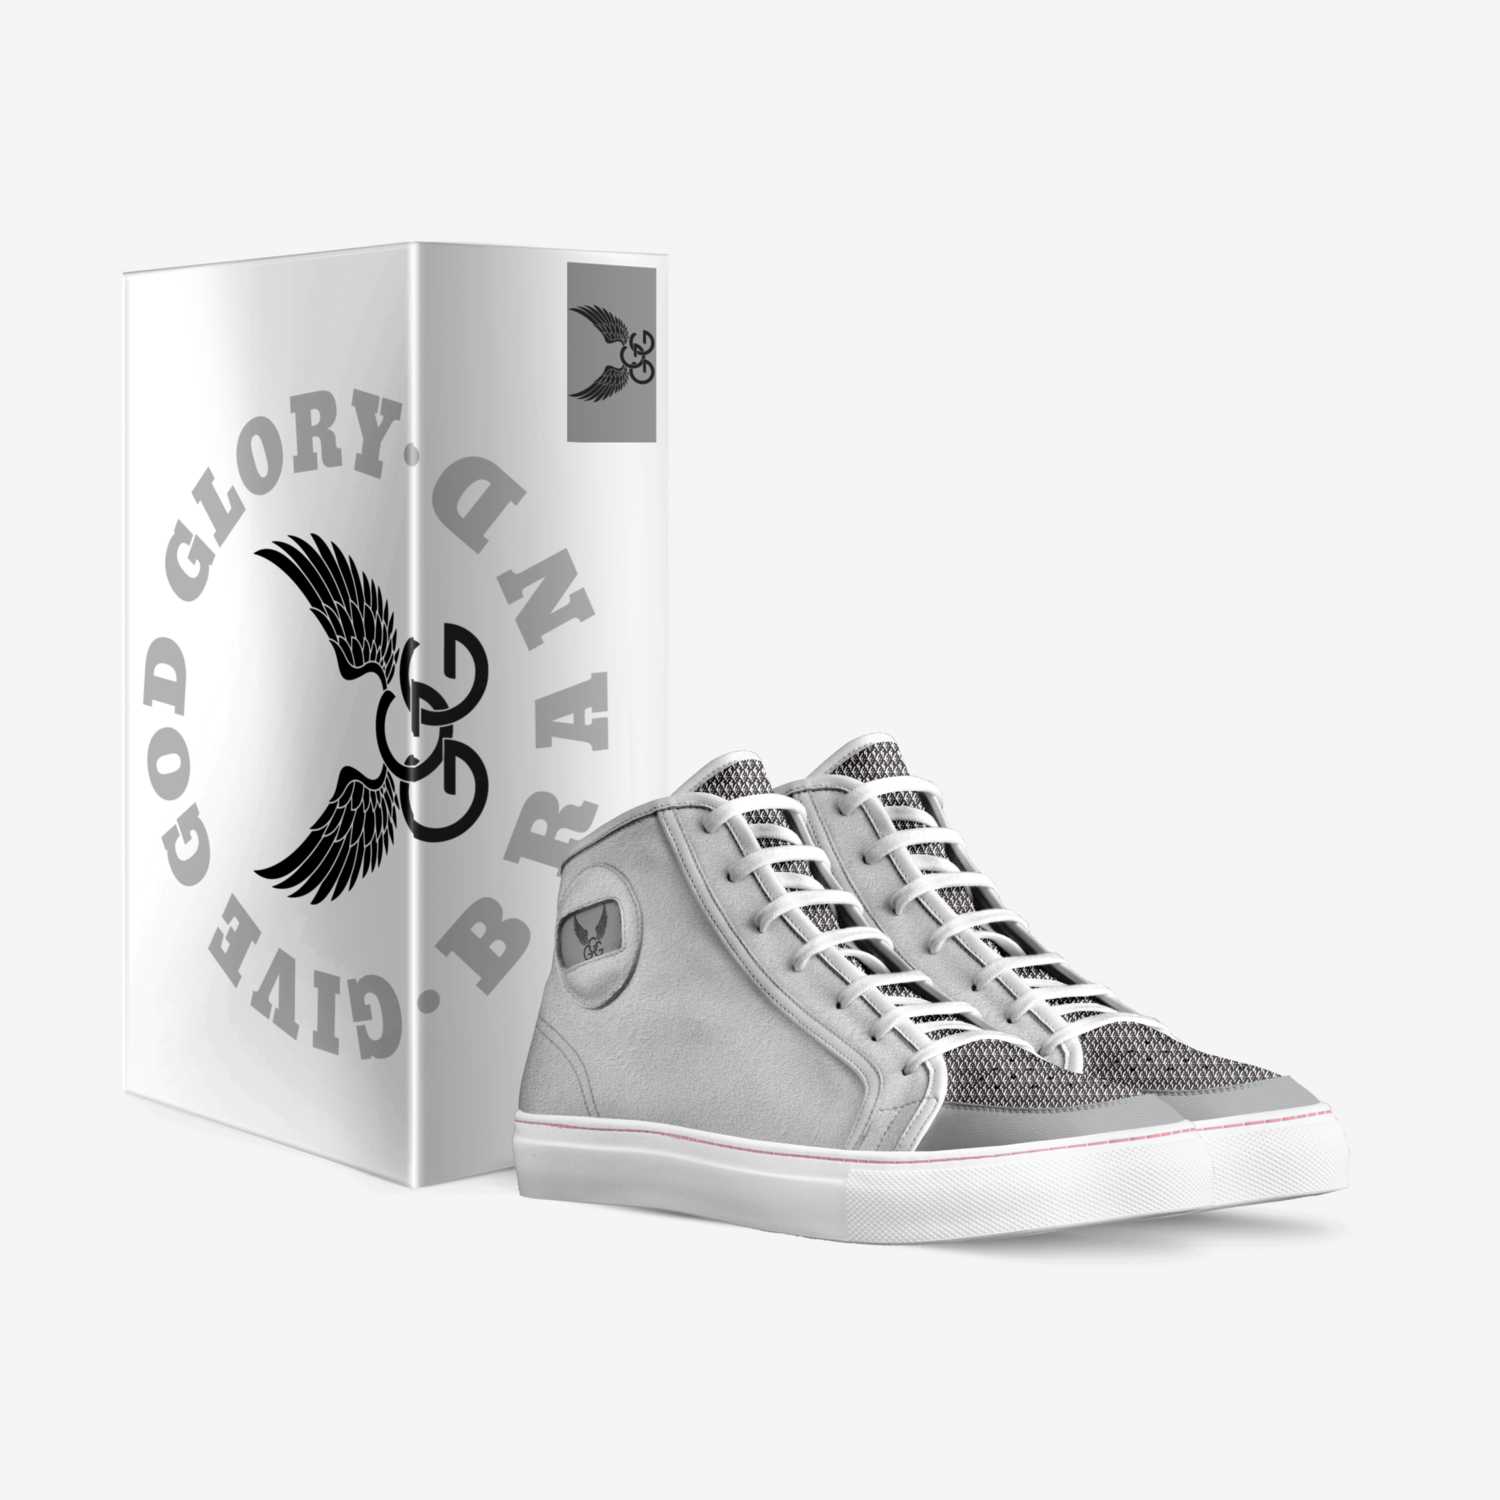 GGG Brand custom made in Italy shoes by Nick Fellows | Box view